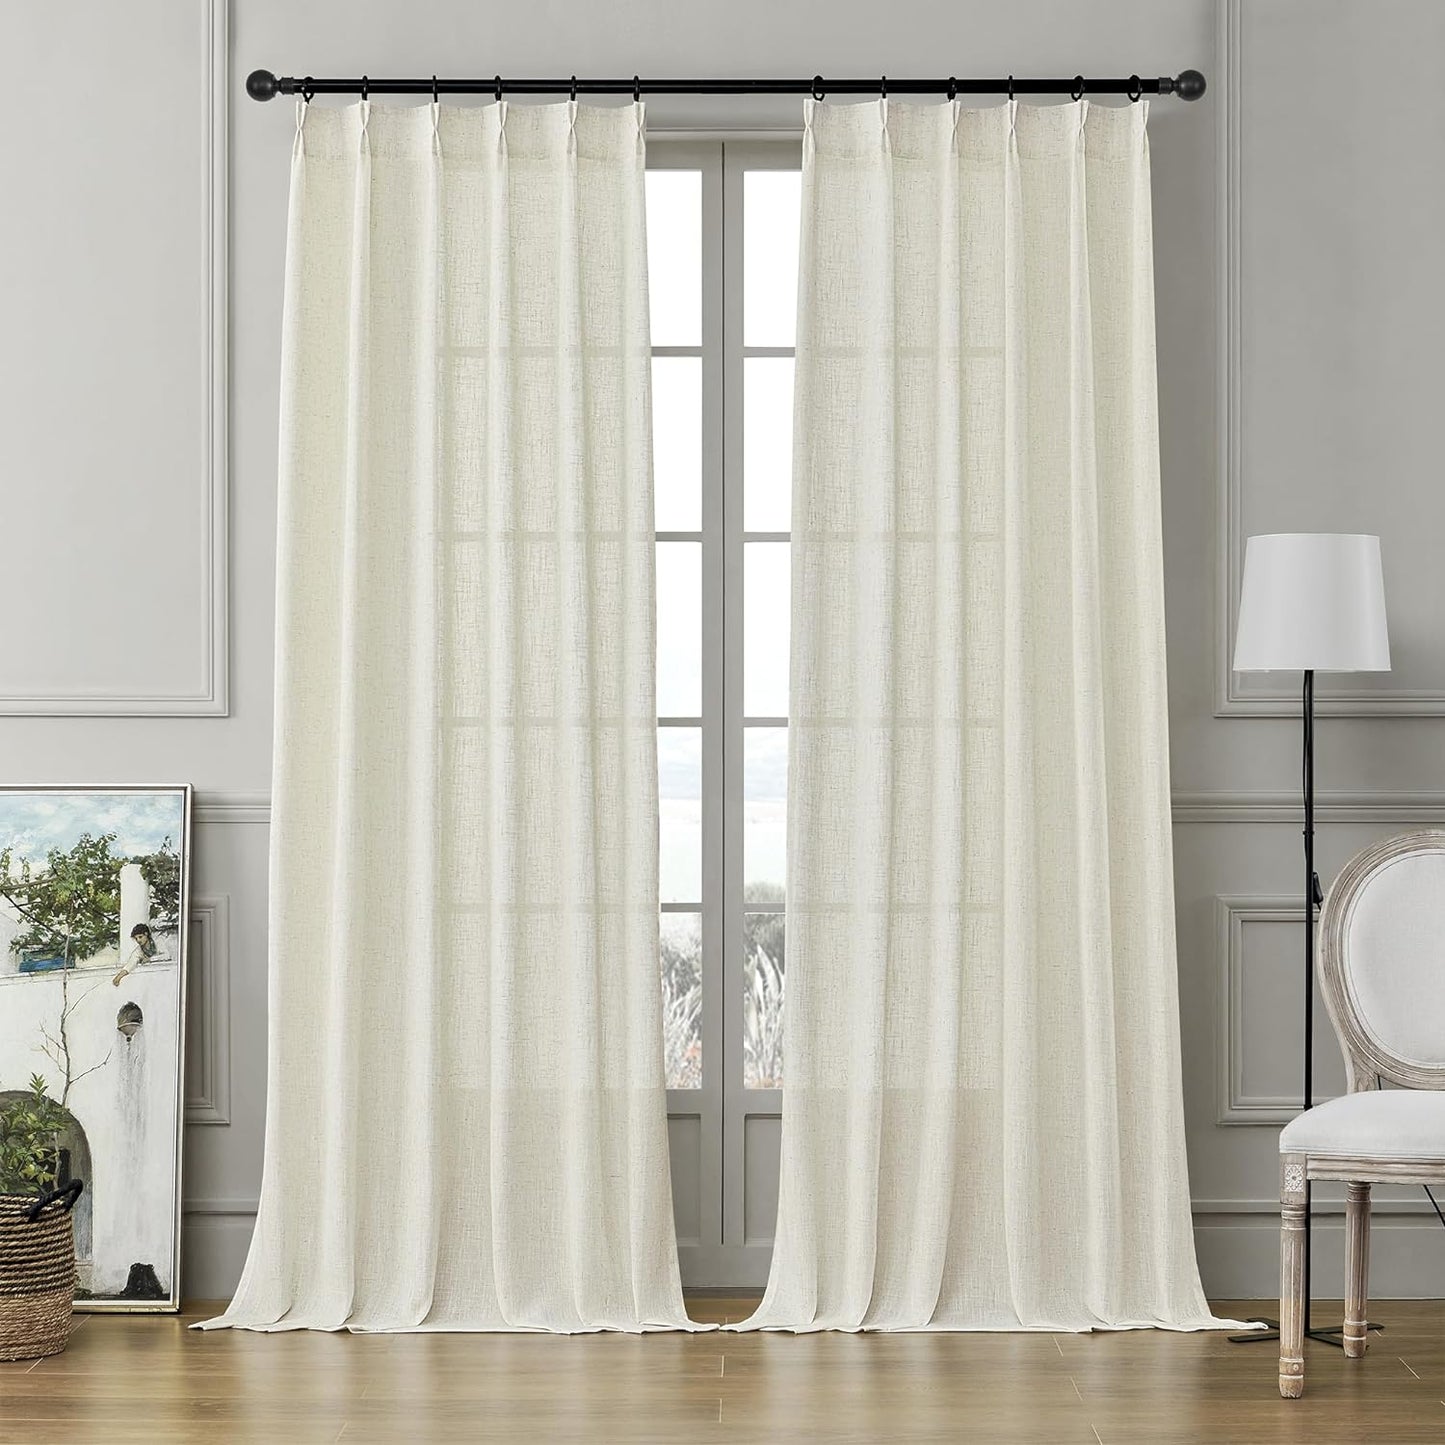 MASWOND White Pinch Pleated Curtains 90 Inches Long 2 Panels for Living Room Semi Sheer Linen Curtains Pinch Pleat Drapes for Traverse Rod Light Filtering Curtains for Dining Bedroom W38Xl90 Length  MASWOND Natural 38X108 